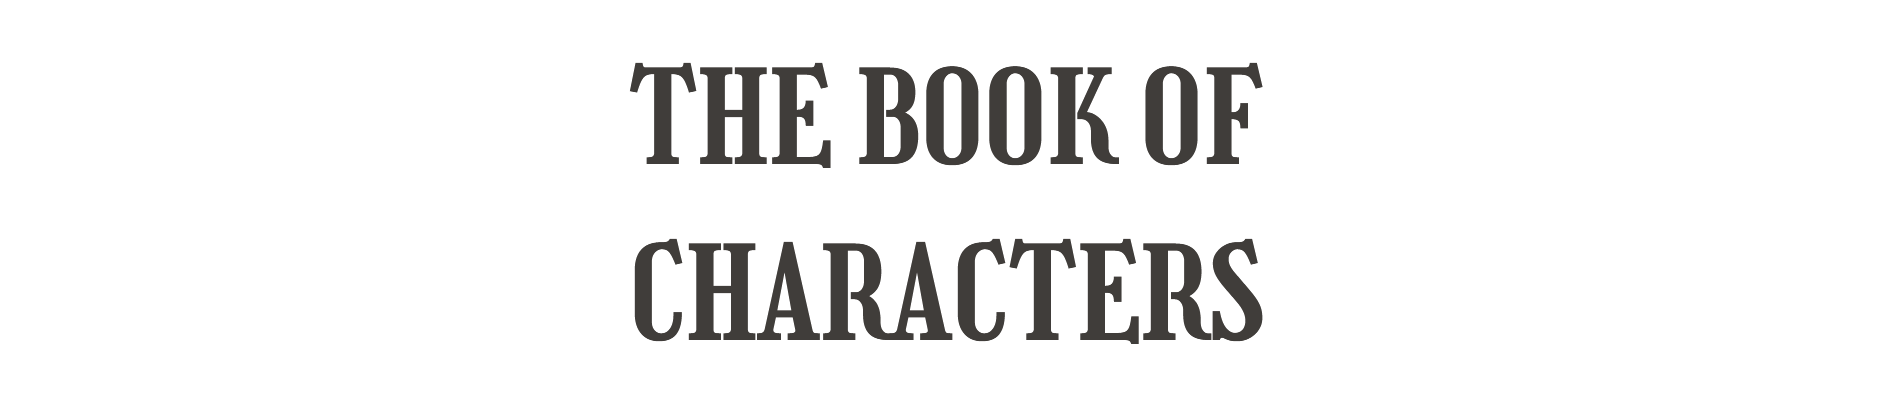 The Book of Characters